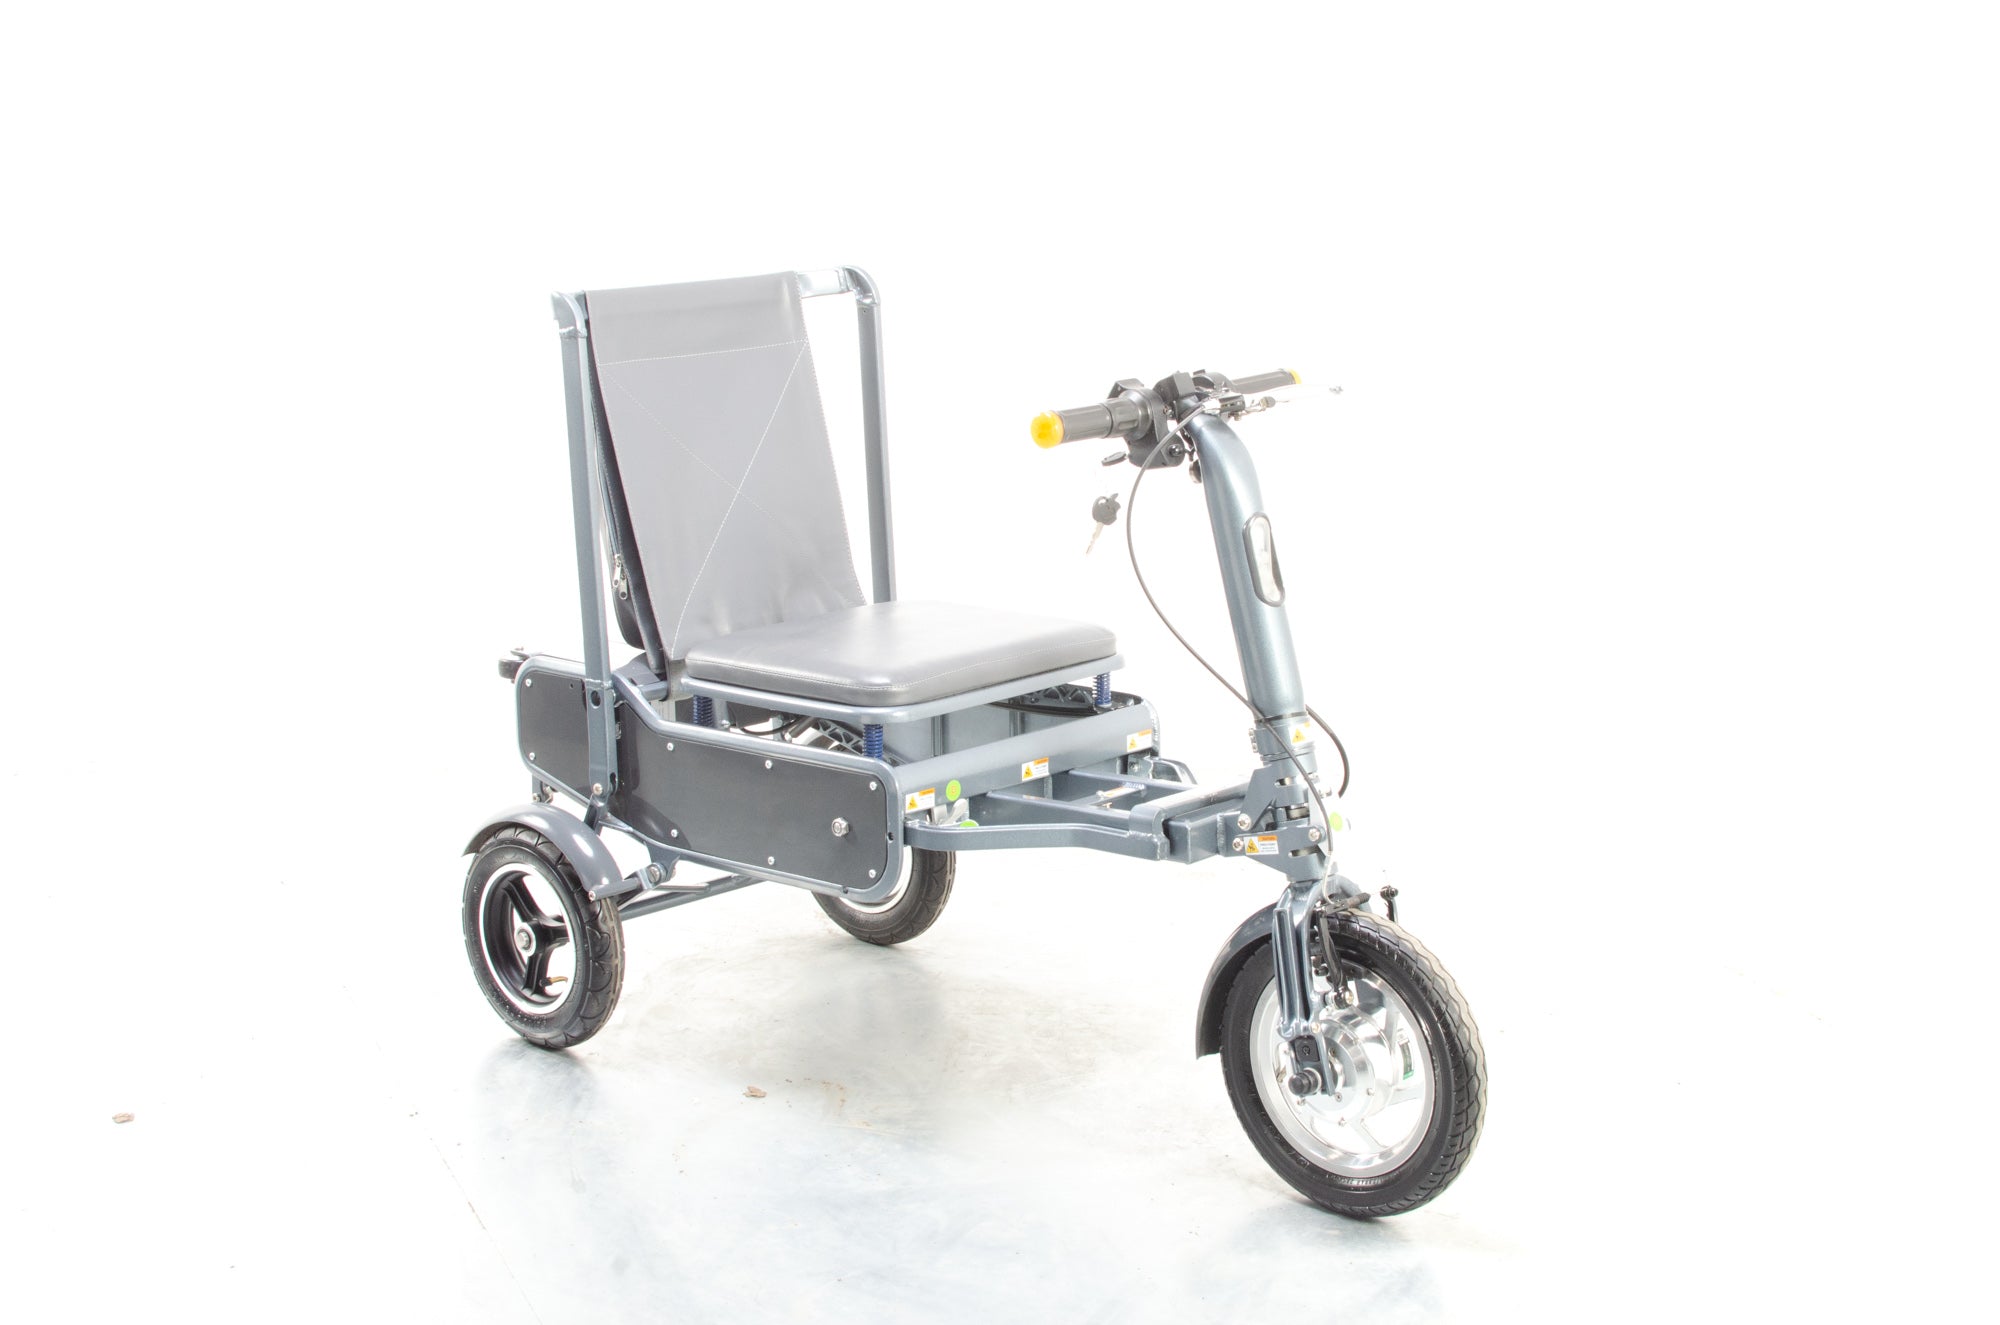 eFOLDI Lightweight Folding Electric Mobility Scooter 8mph Used